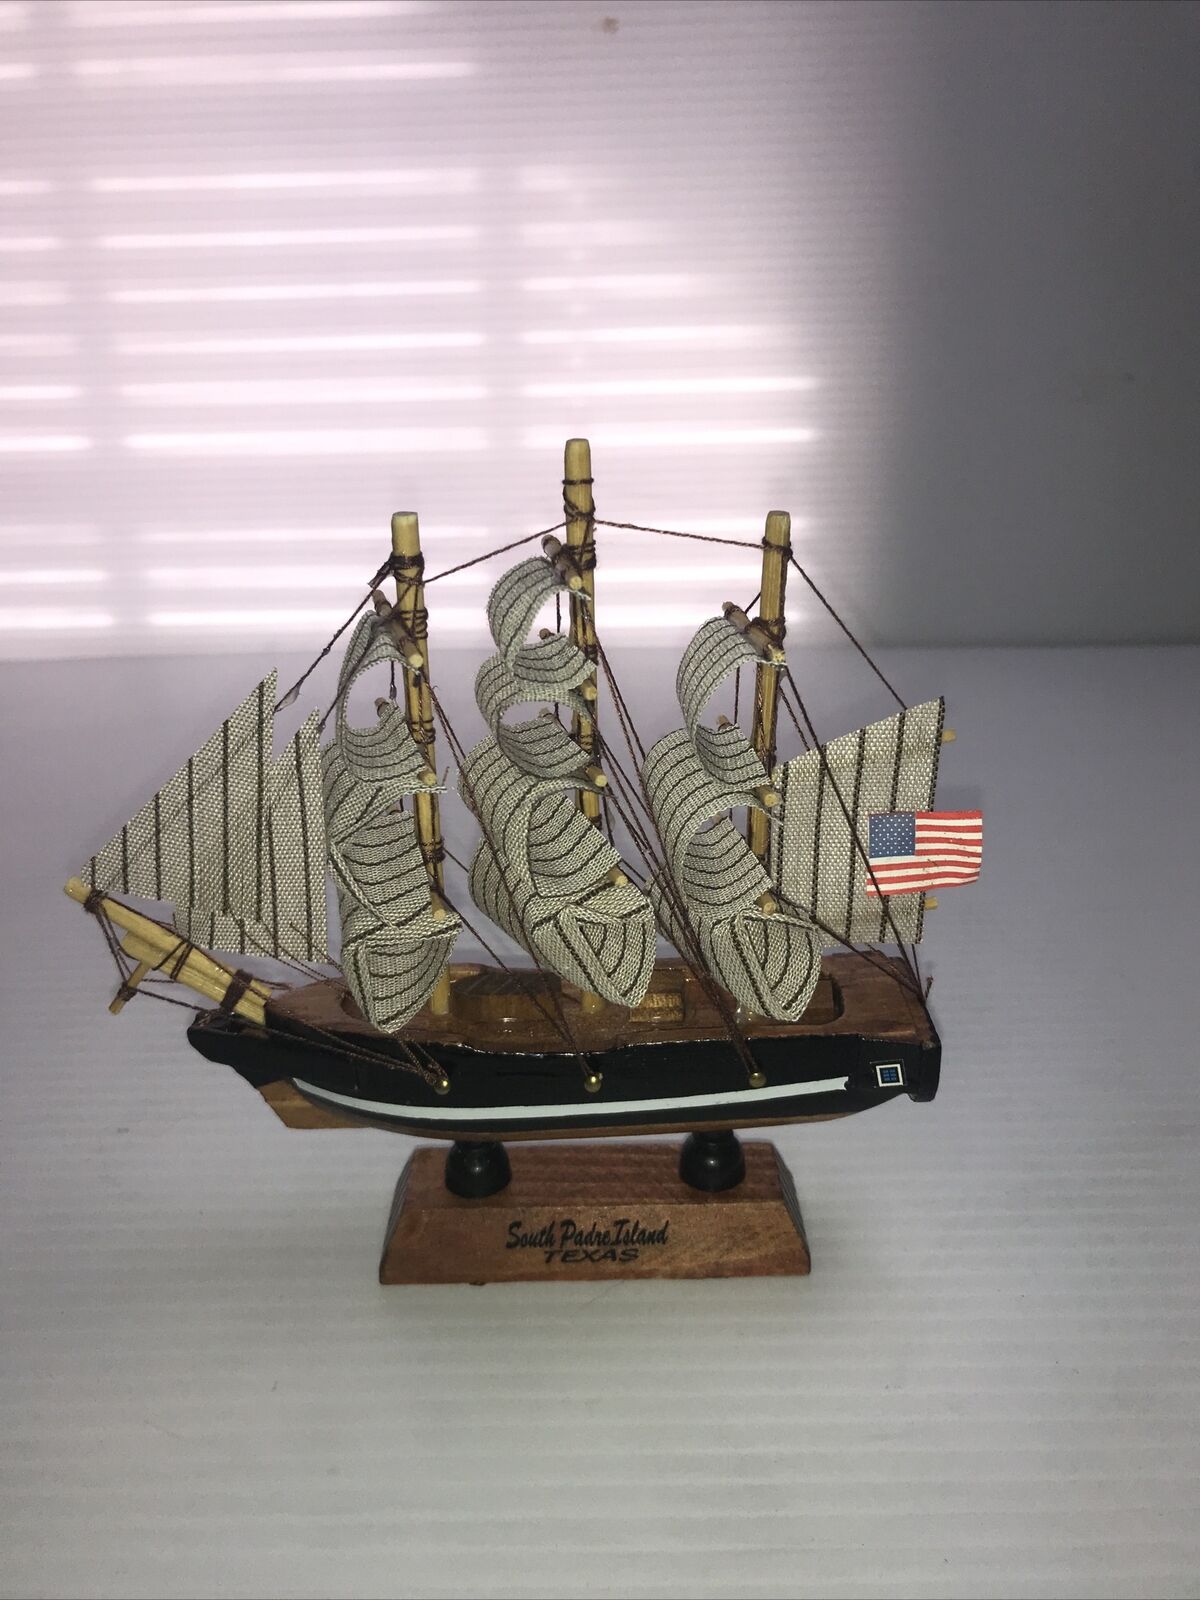 South Padre Island Texas Model boat Small 6 X 7 In